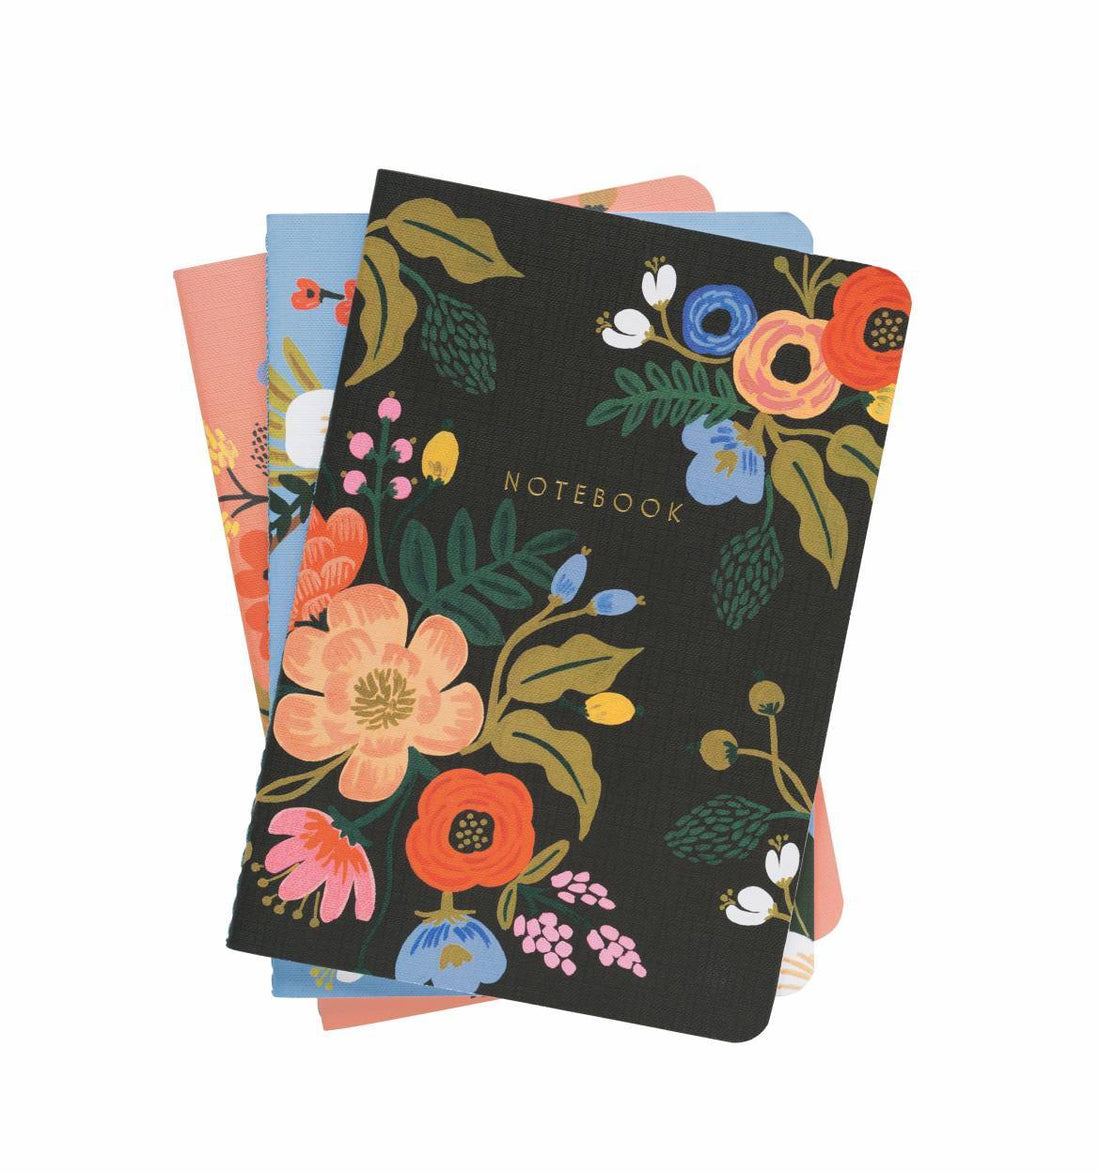 6 Functions of Rifle Paper Co.